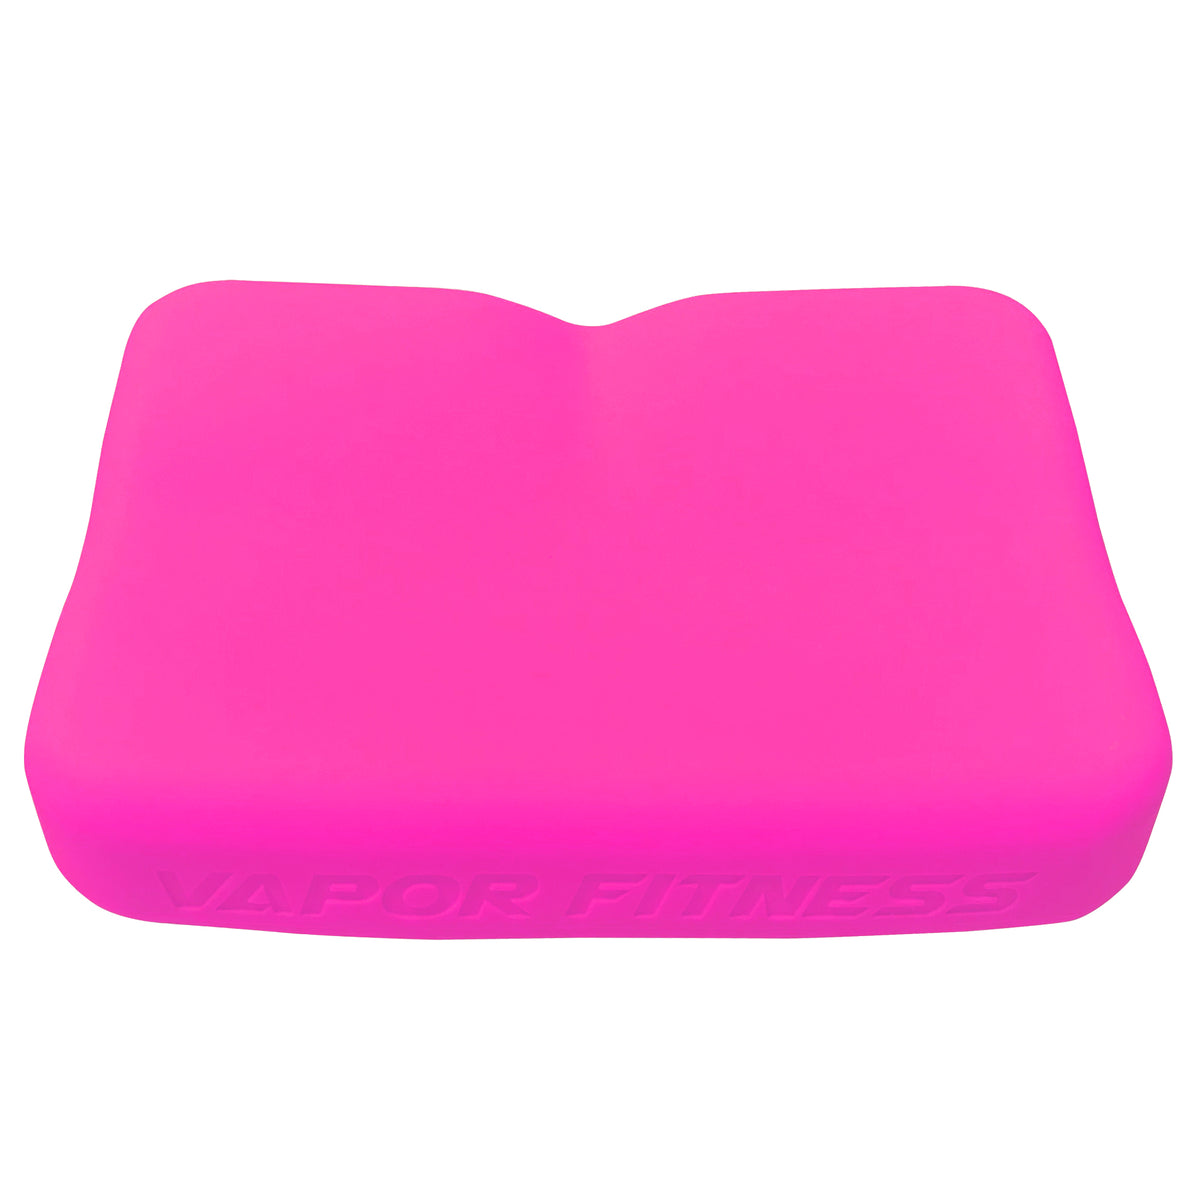 Orange Silicone Seat Cover Designer for the Water Rower – Vapor